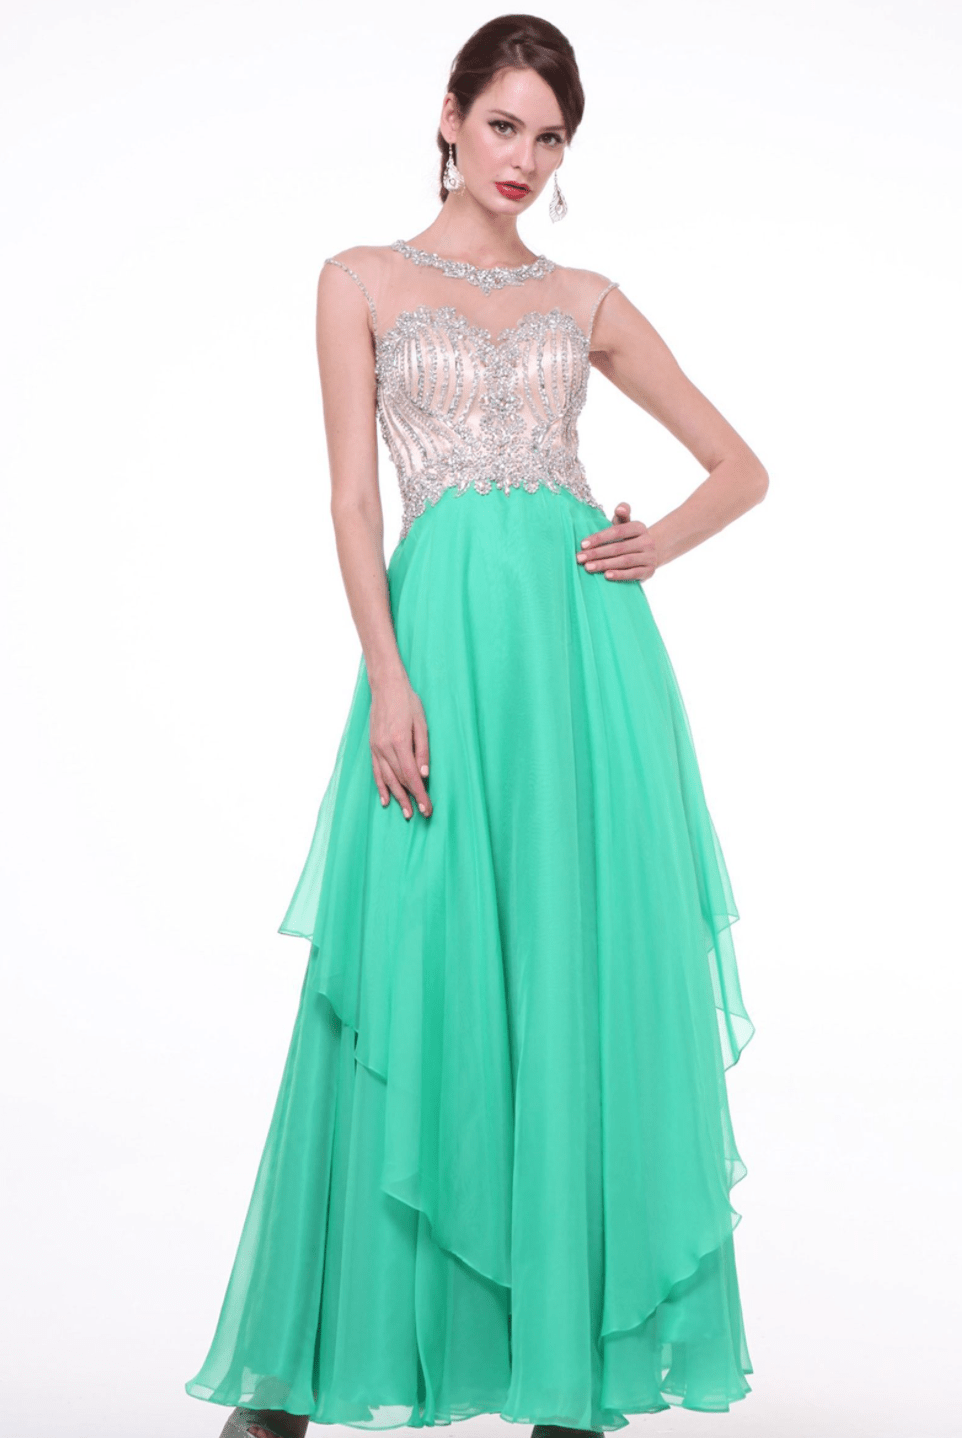 Green Chiffon Crystal Beaded Dress by Cinderella Divine - NORMA REED